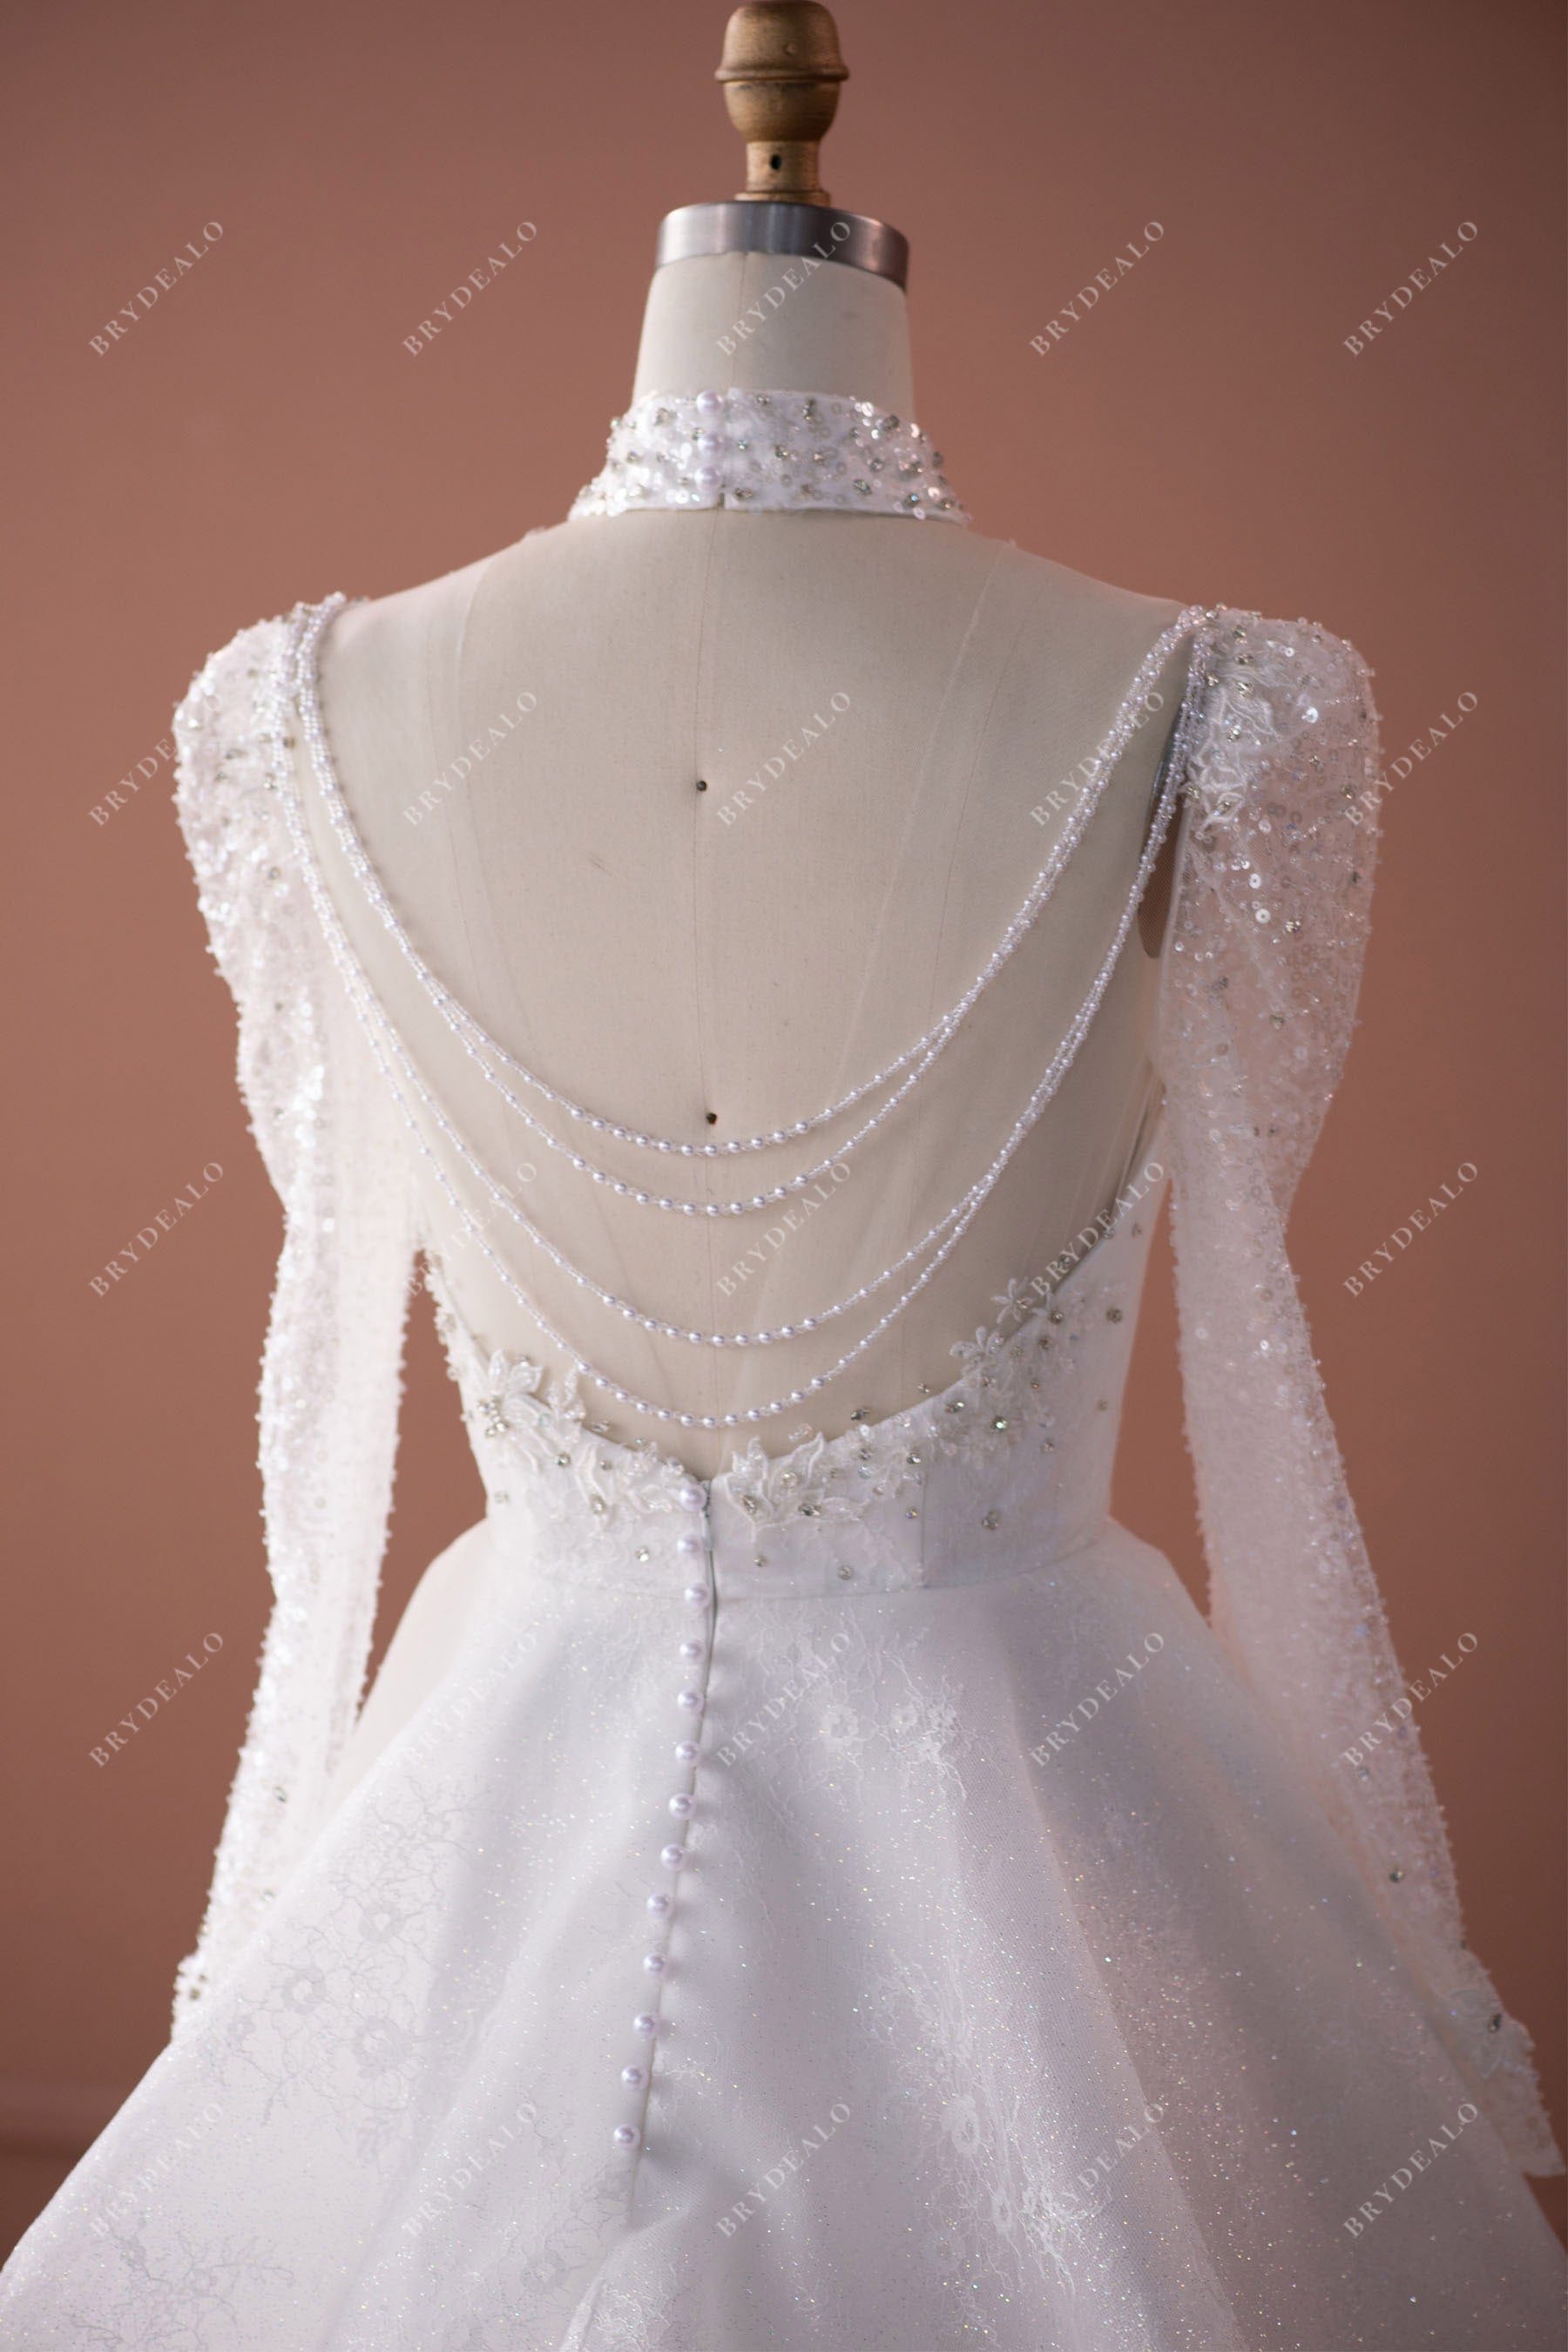 Luxury Beaded Chain Back Illusion Sleeved Ballgown Wedding Dress with Detachable Overskirt